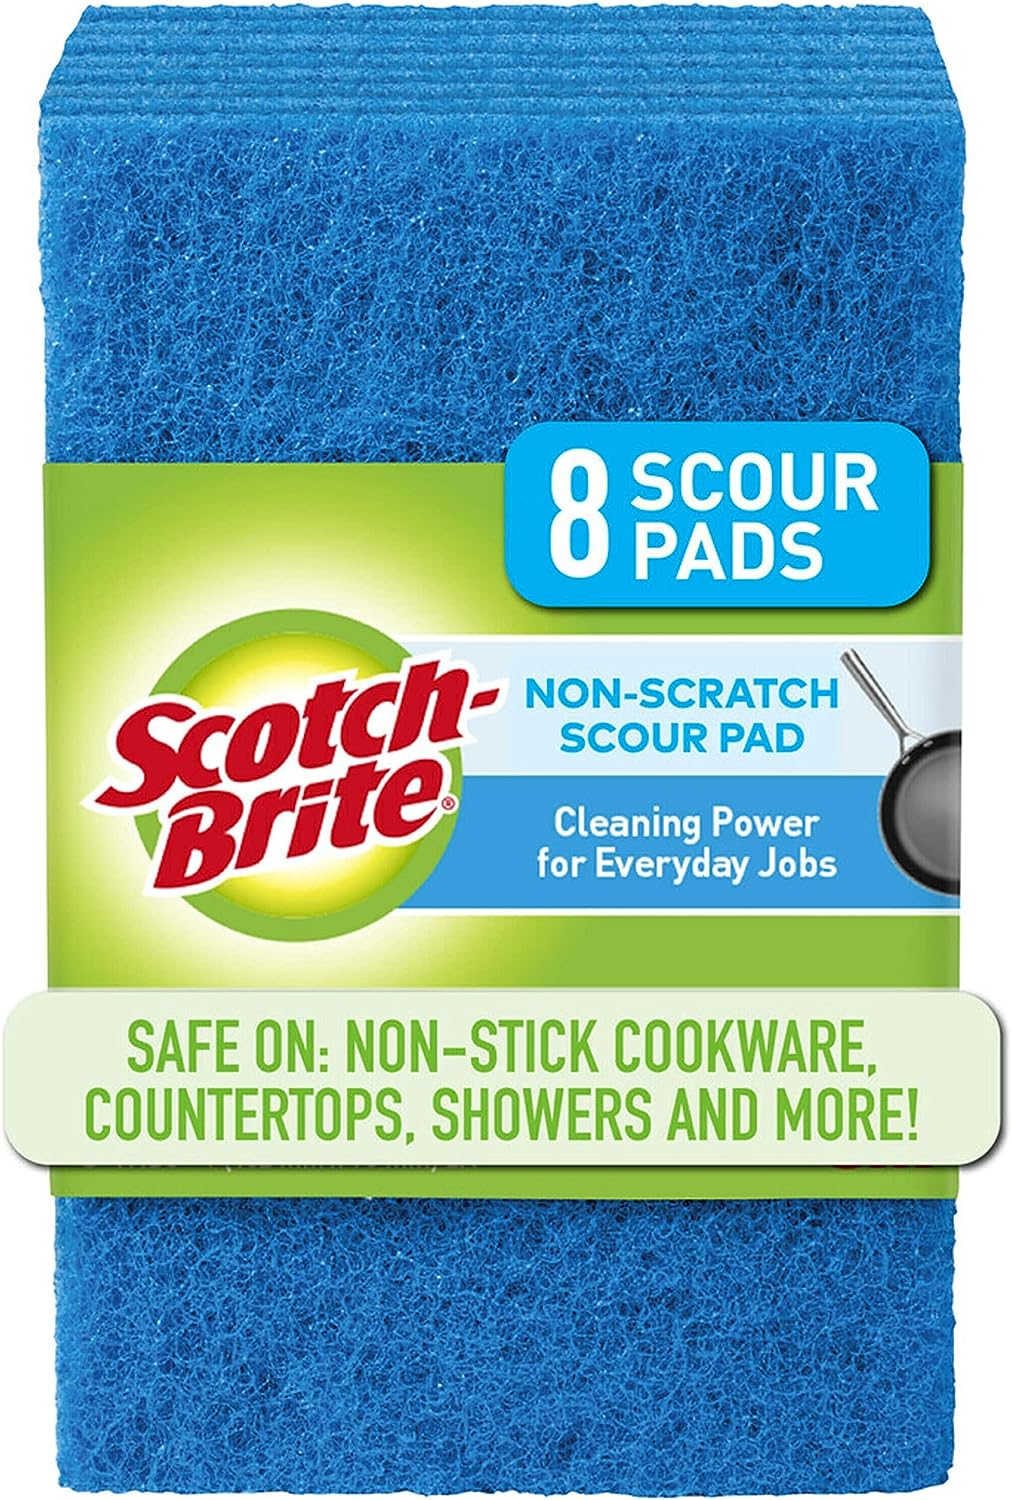 3M Scotch-Brite Non-Scratch Scour Pads, Scouring Pads for Kitchen and Dish Cleaning, 8 Pads